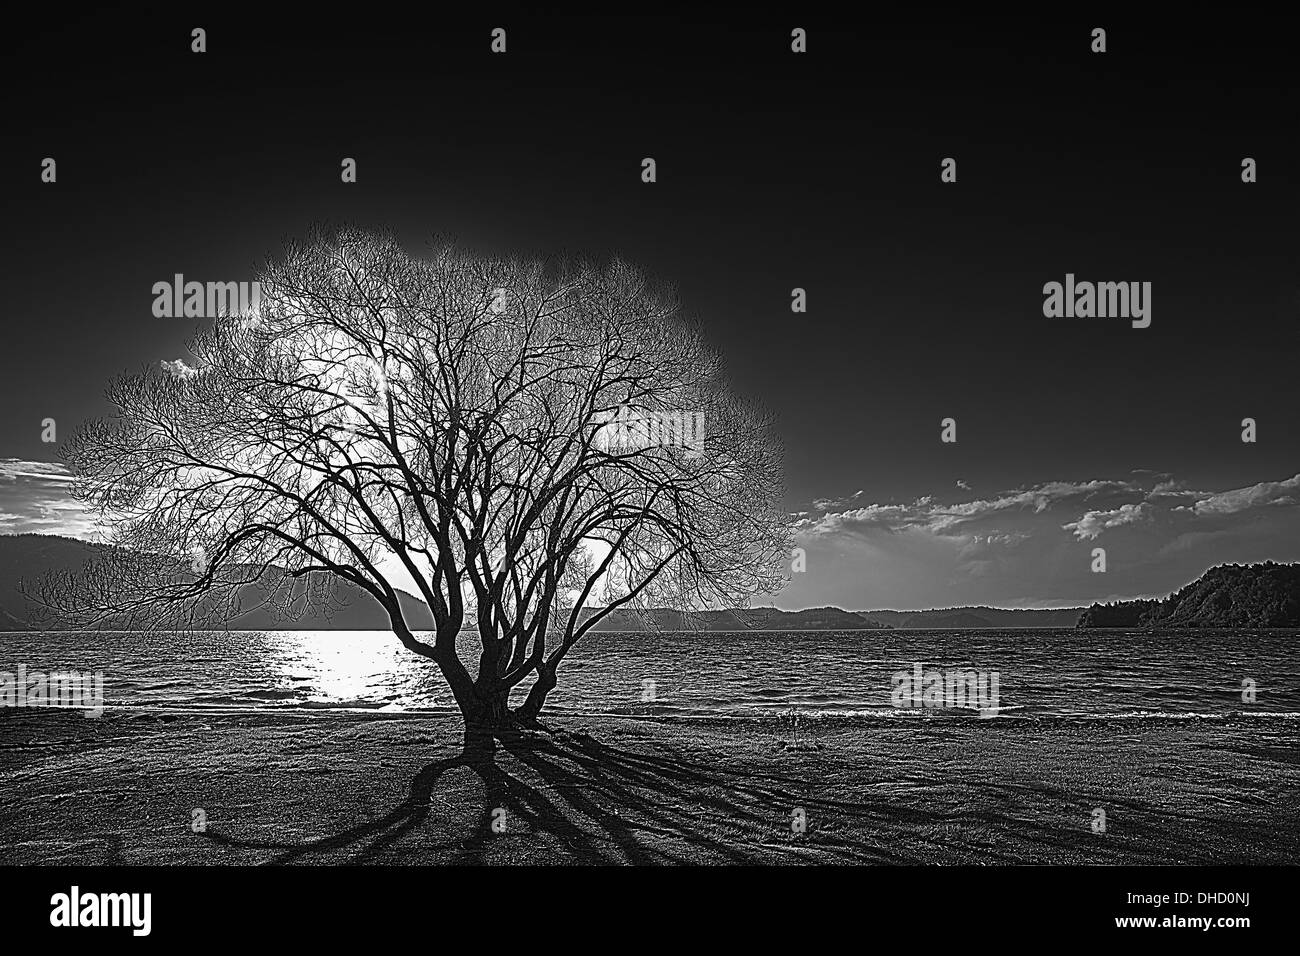 A black and white landscape photograph of a tree backlit against a lake at dawn, shot in New Zealand. Stock Photo